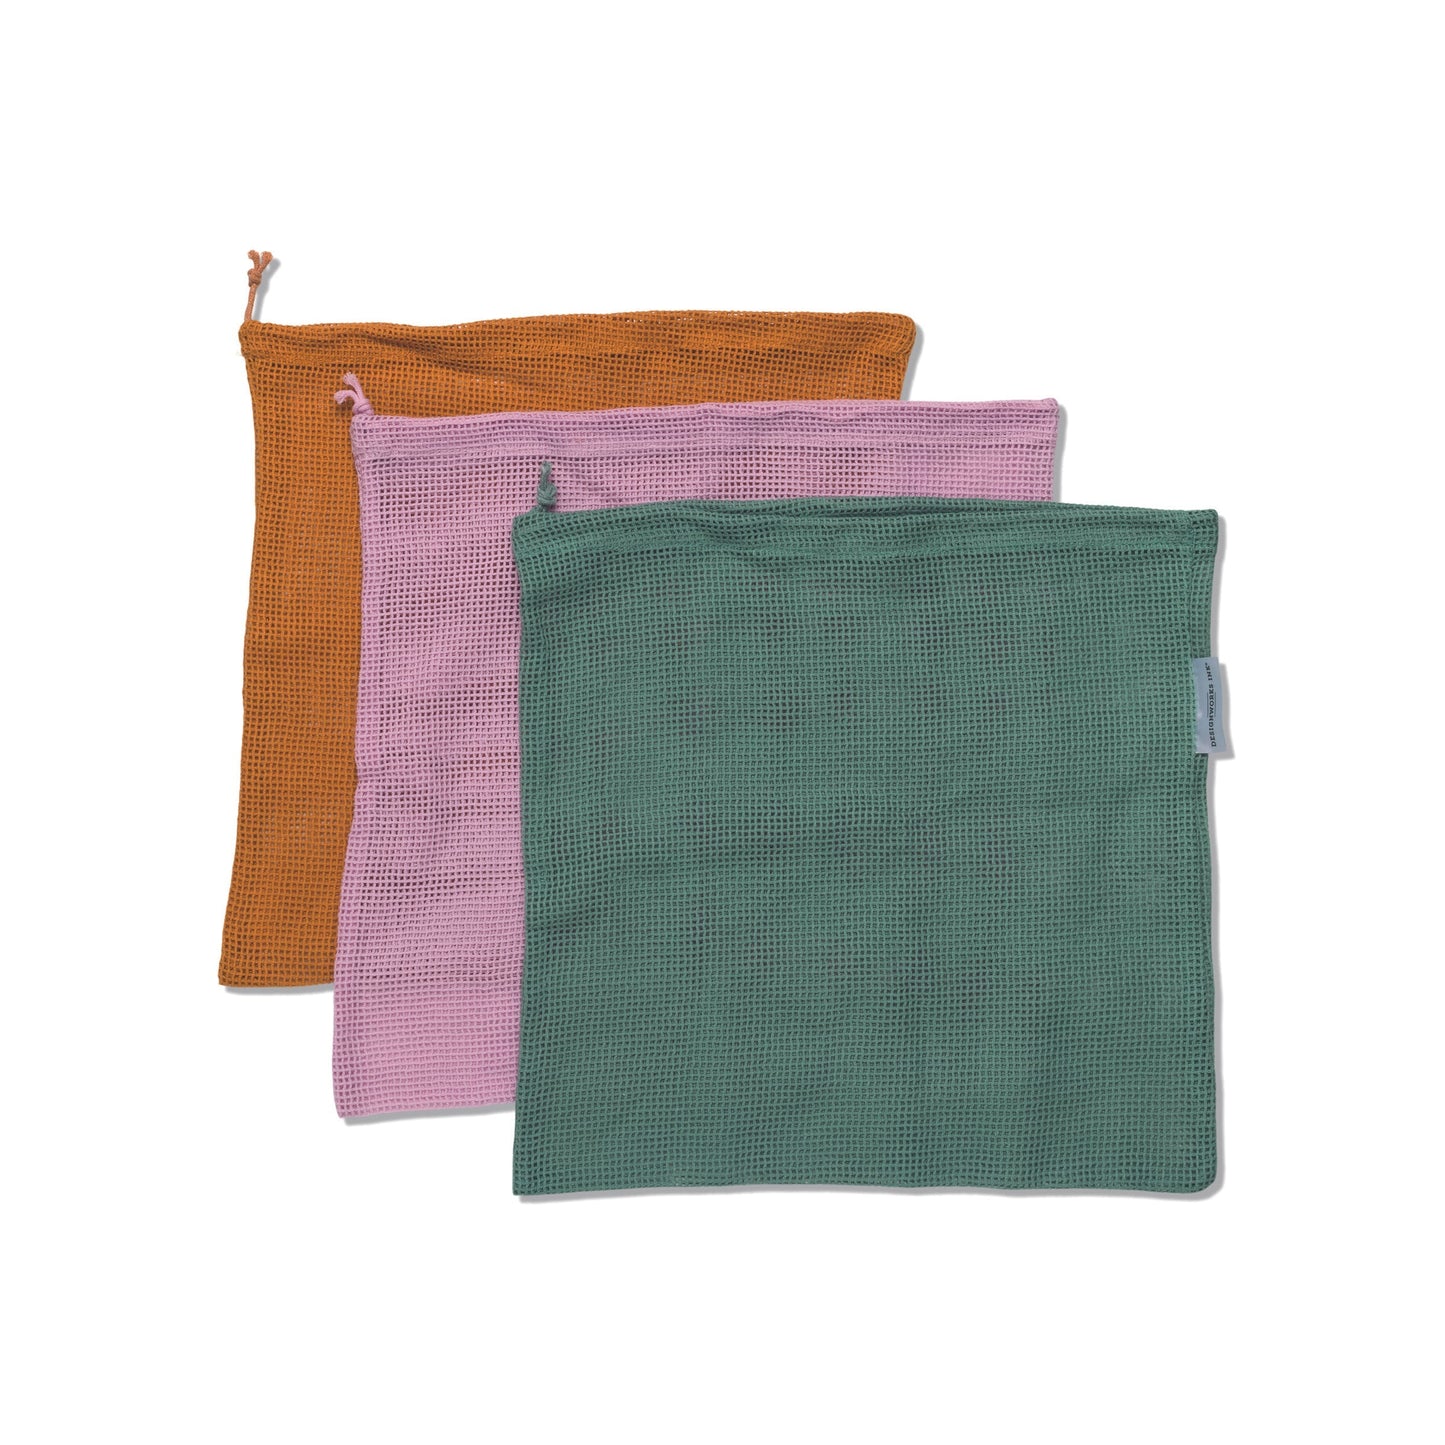 Three market bags in maroon, pink and green